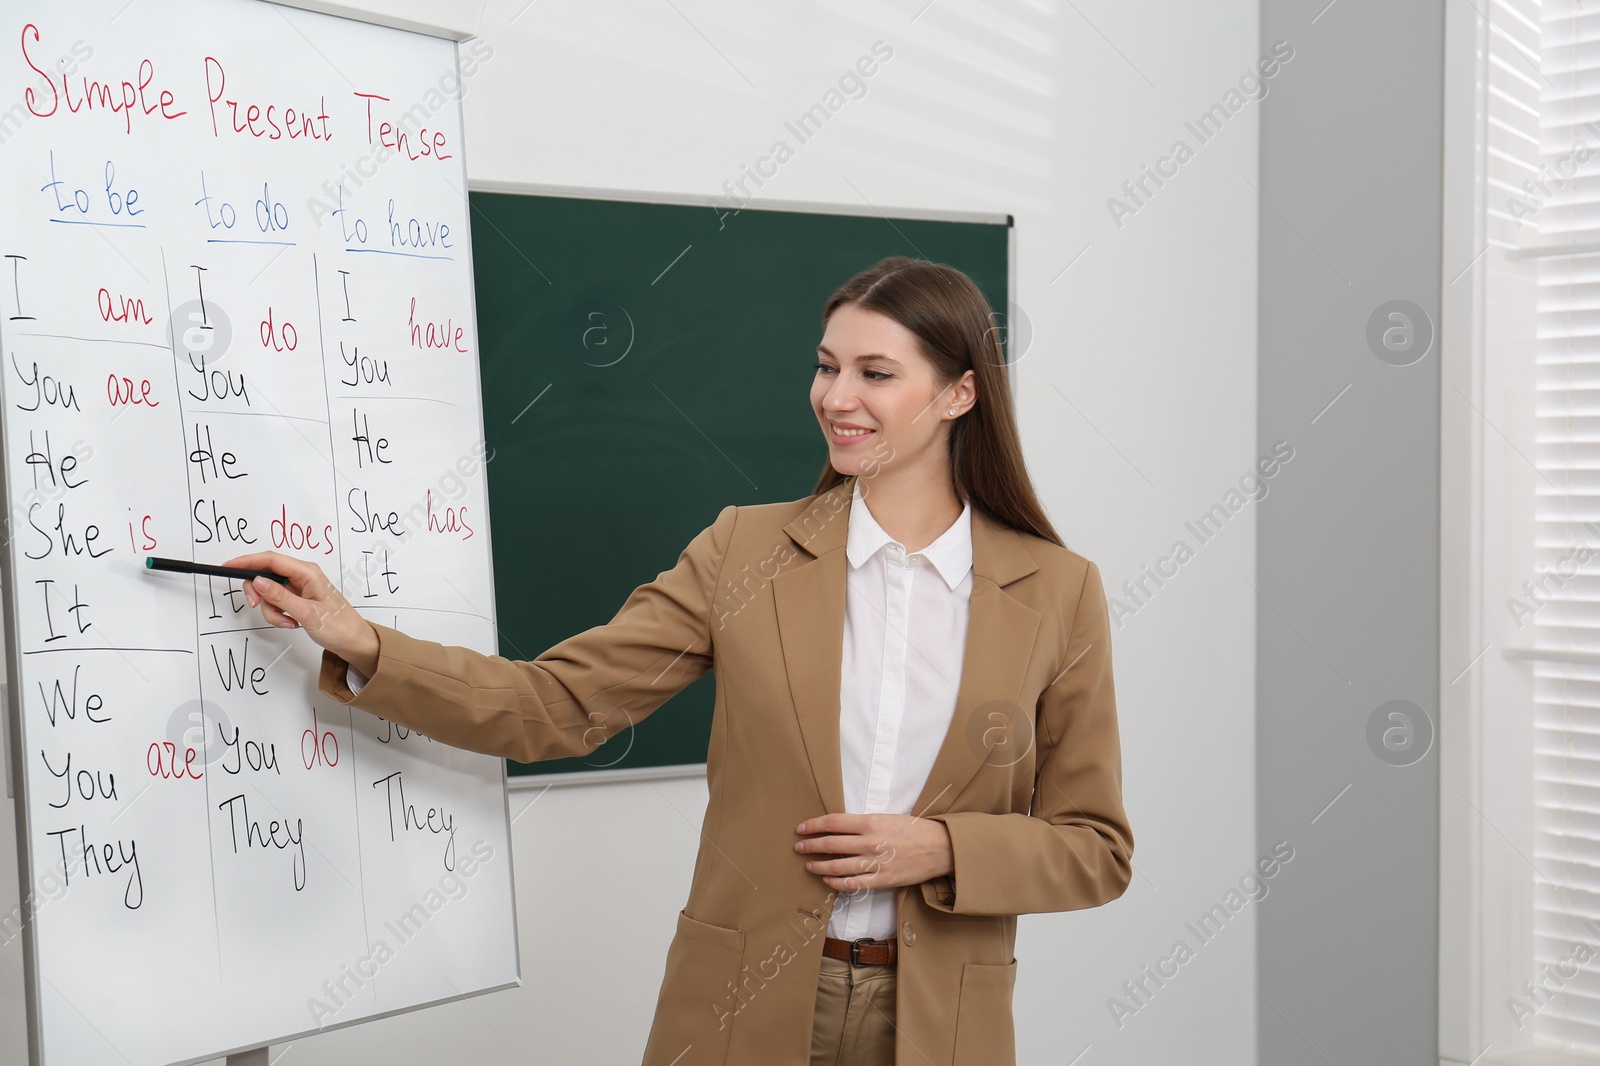 Photo of English teacher giving lesson on simple present tense near whiteboard in classroom